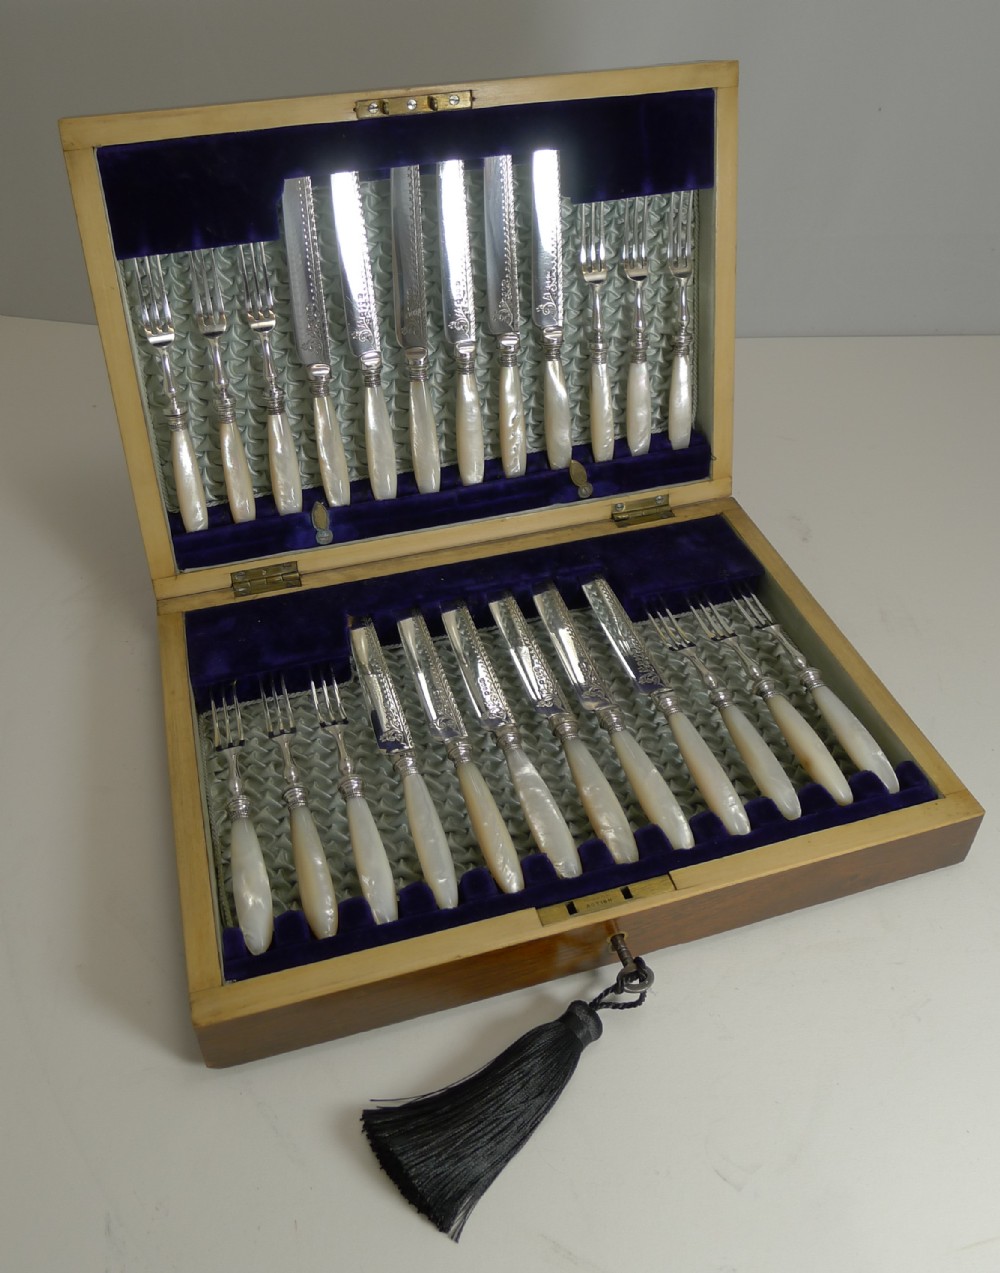 magnificent set 12 fruit knives and forks mother of pearl silver plate c1890 by james deakin